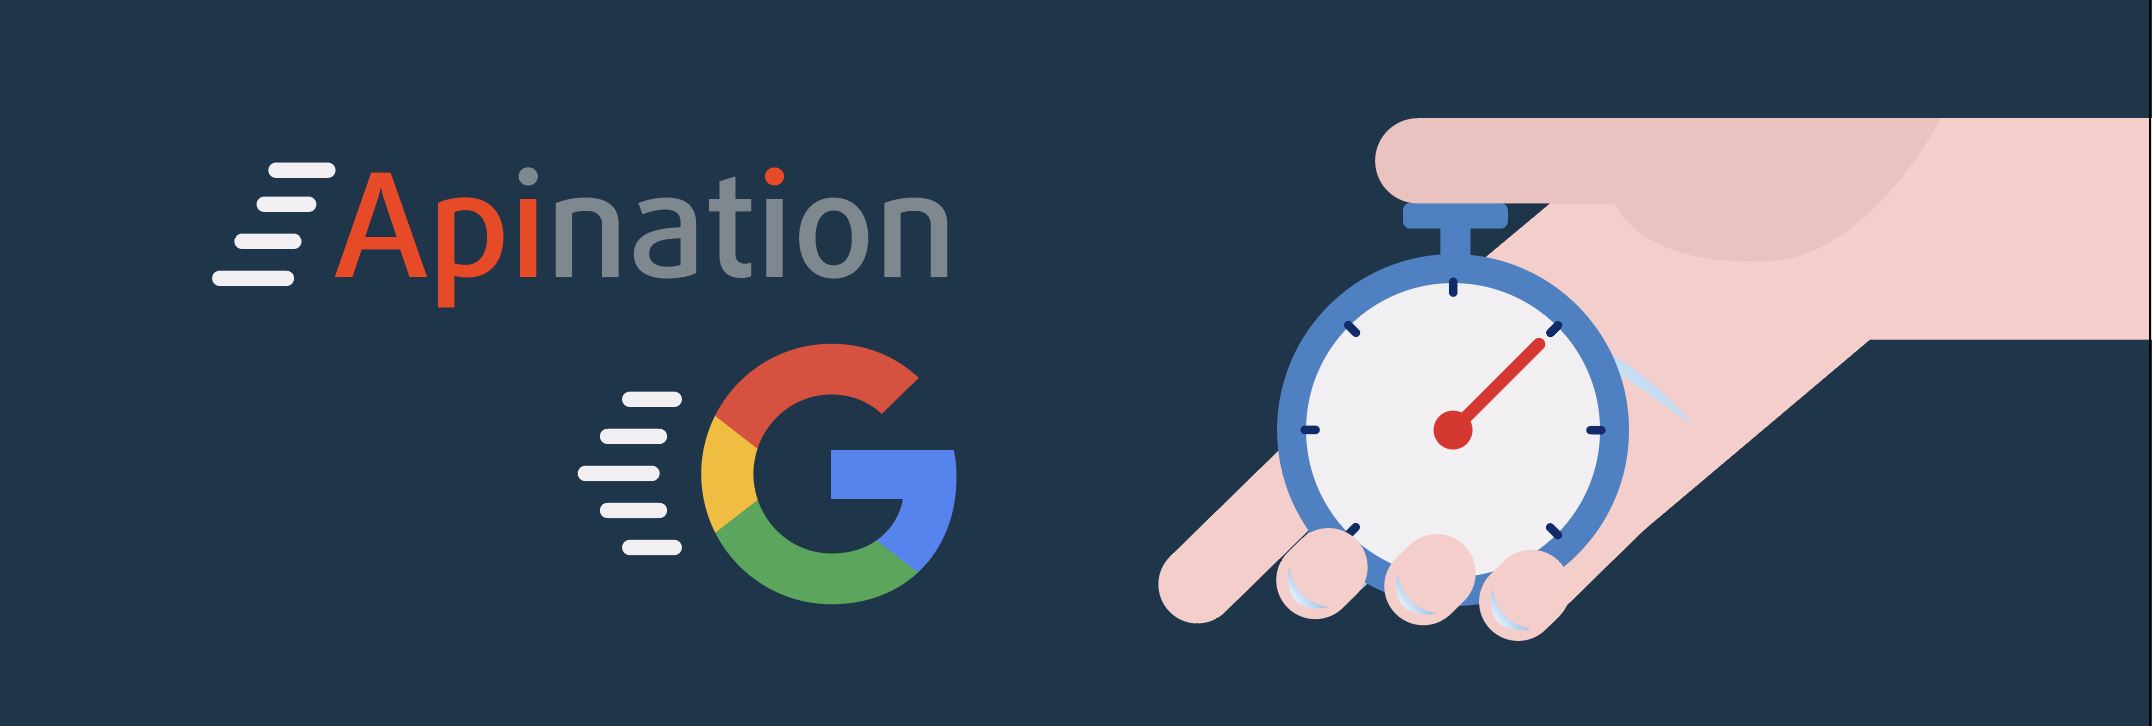 Illustration of API Nation and Google logos along with a hand holding a stopwatch